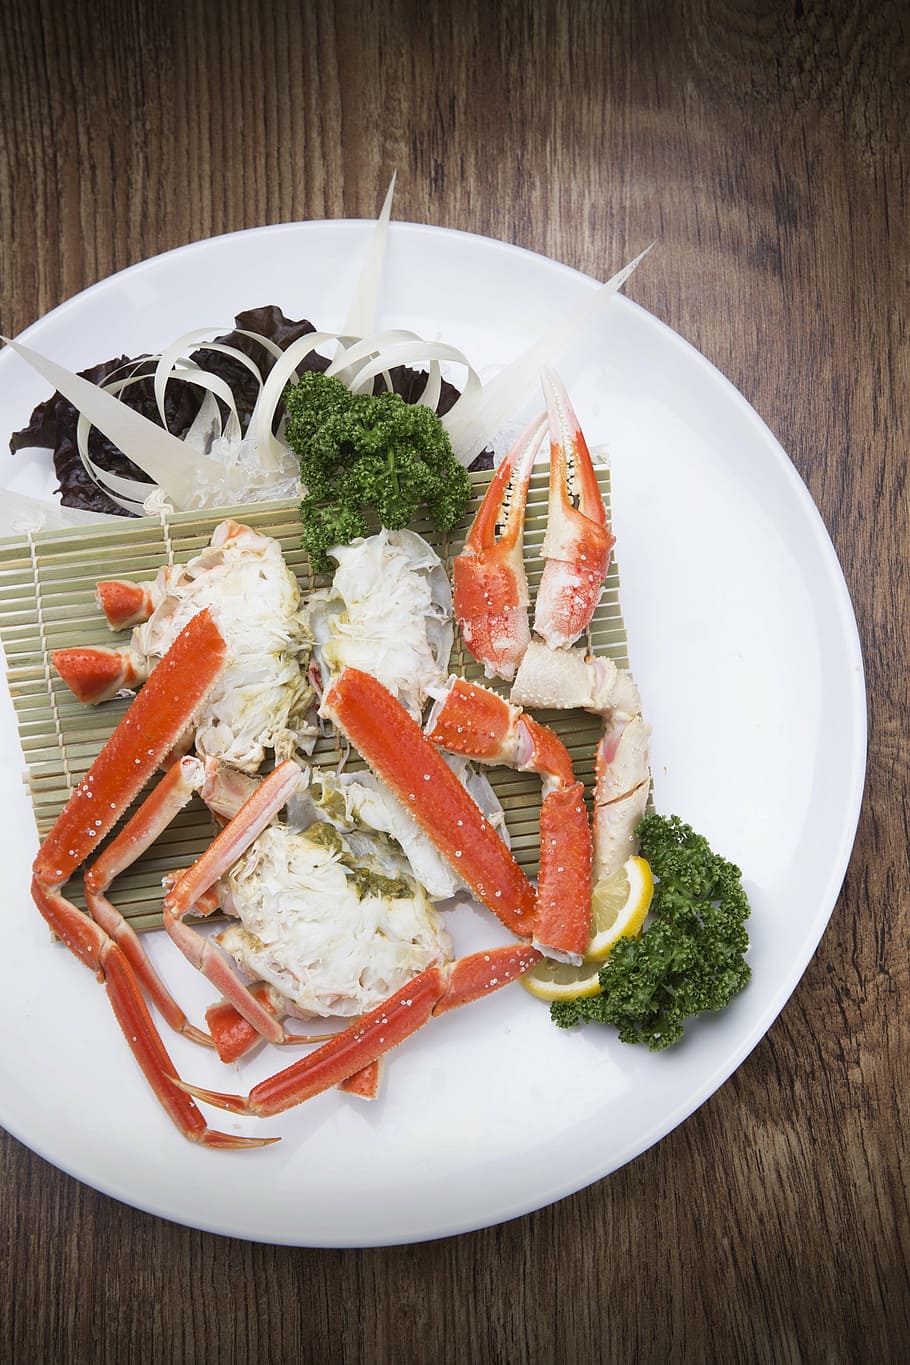 snow crab, self-restraint up to, that you to, food and drink, food, freshness, wellbeing, plate, healthy eating, table